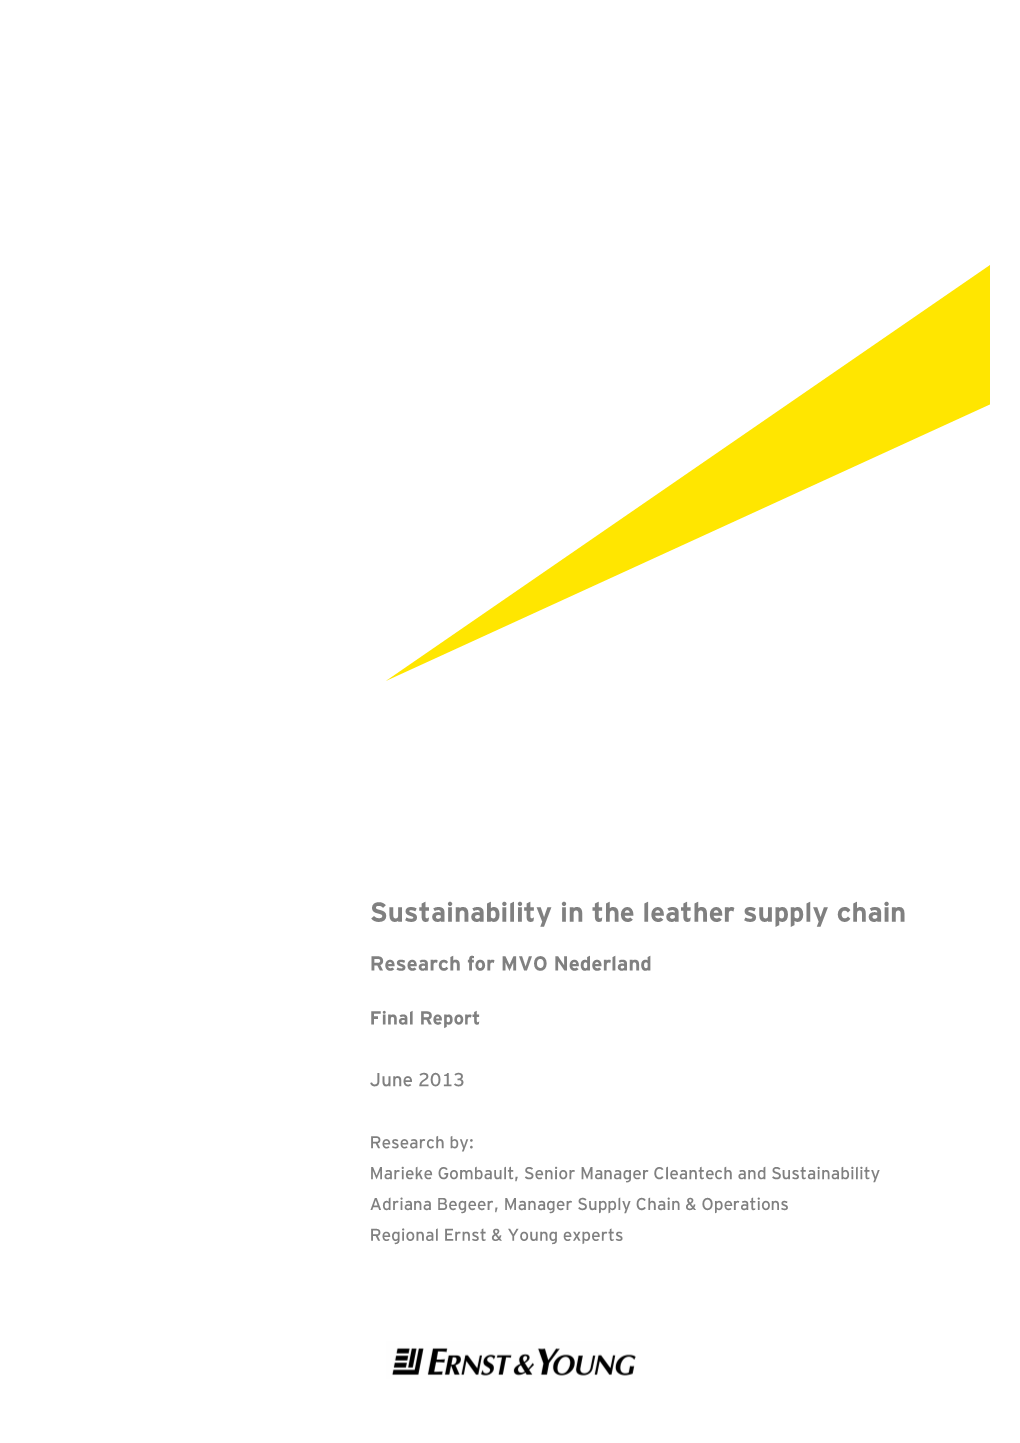 Research on Sustainability in the Leather Supply Chain Final Report